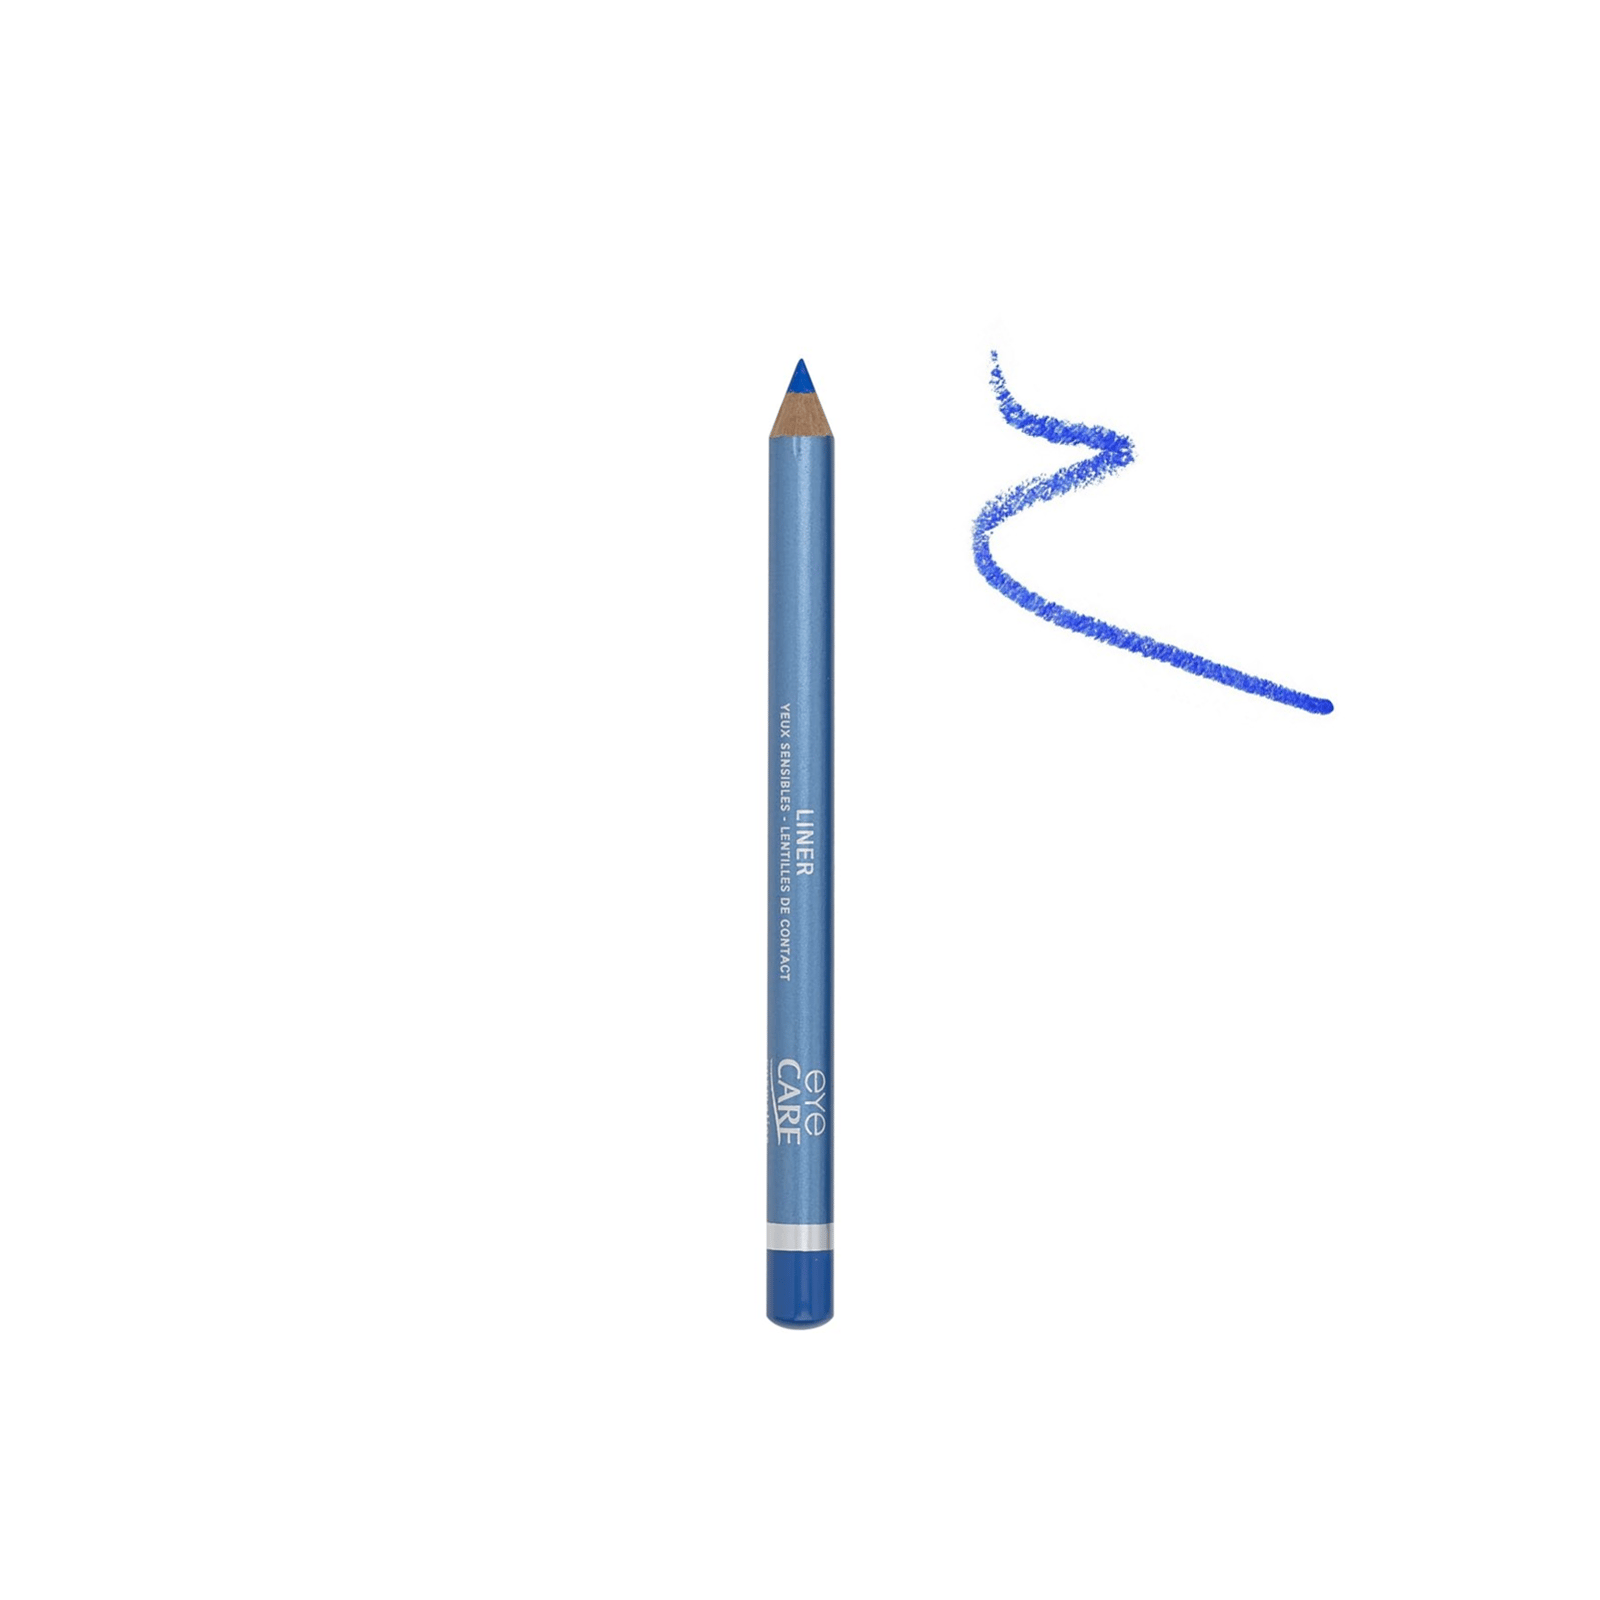 EyeCare Pencil Liner Outremer 1.1g (0.038 oz)